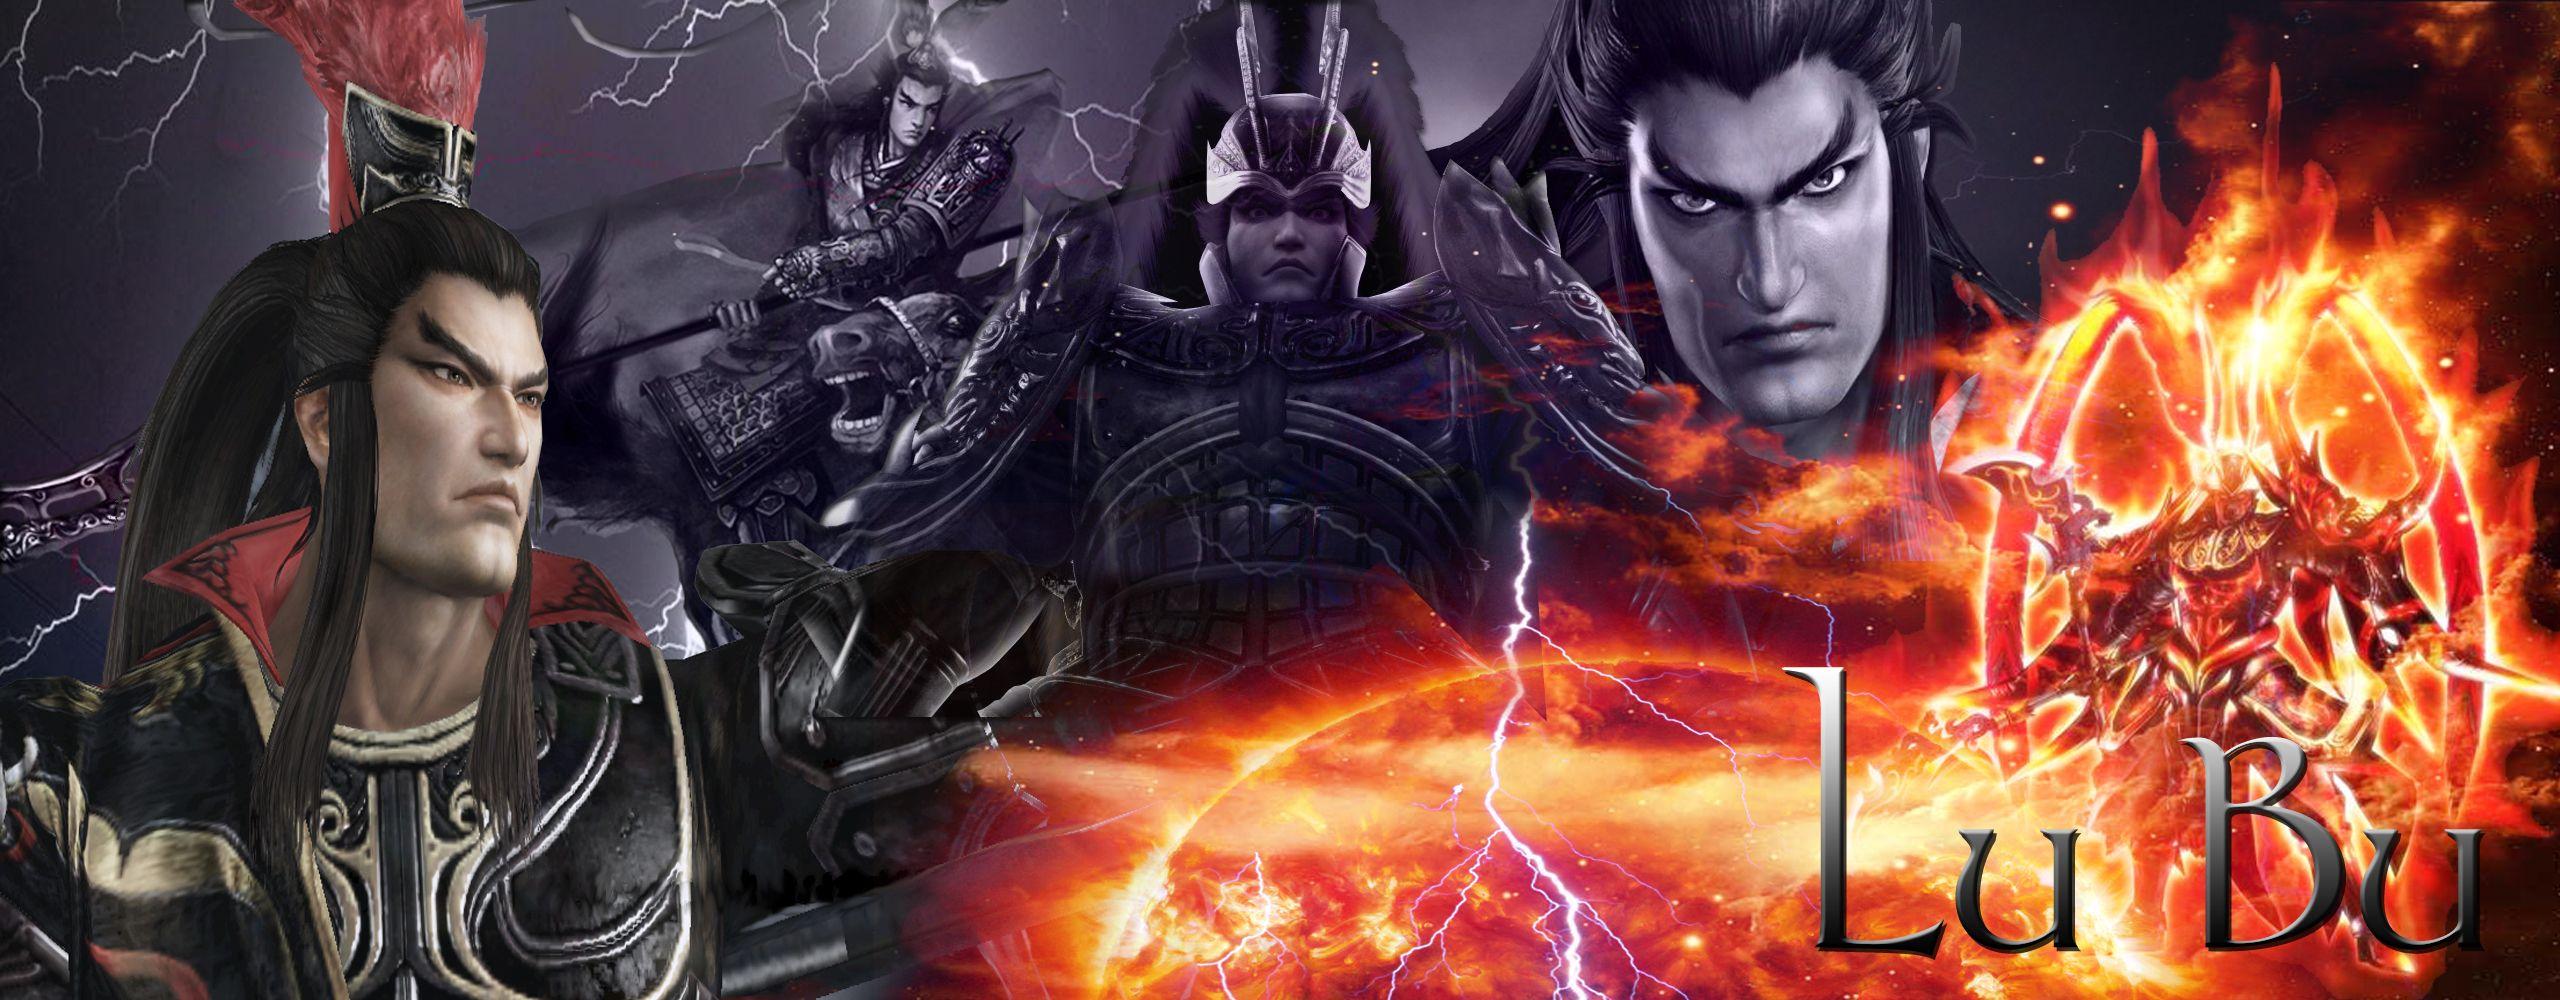 dynasty warriors 8 pc review